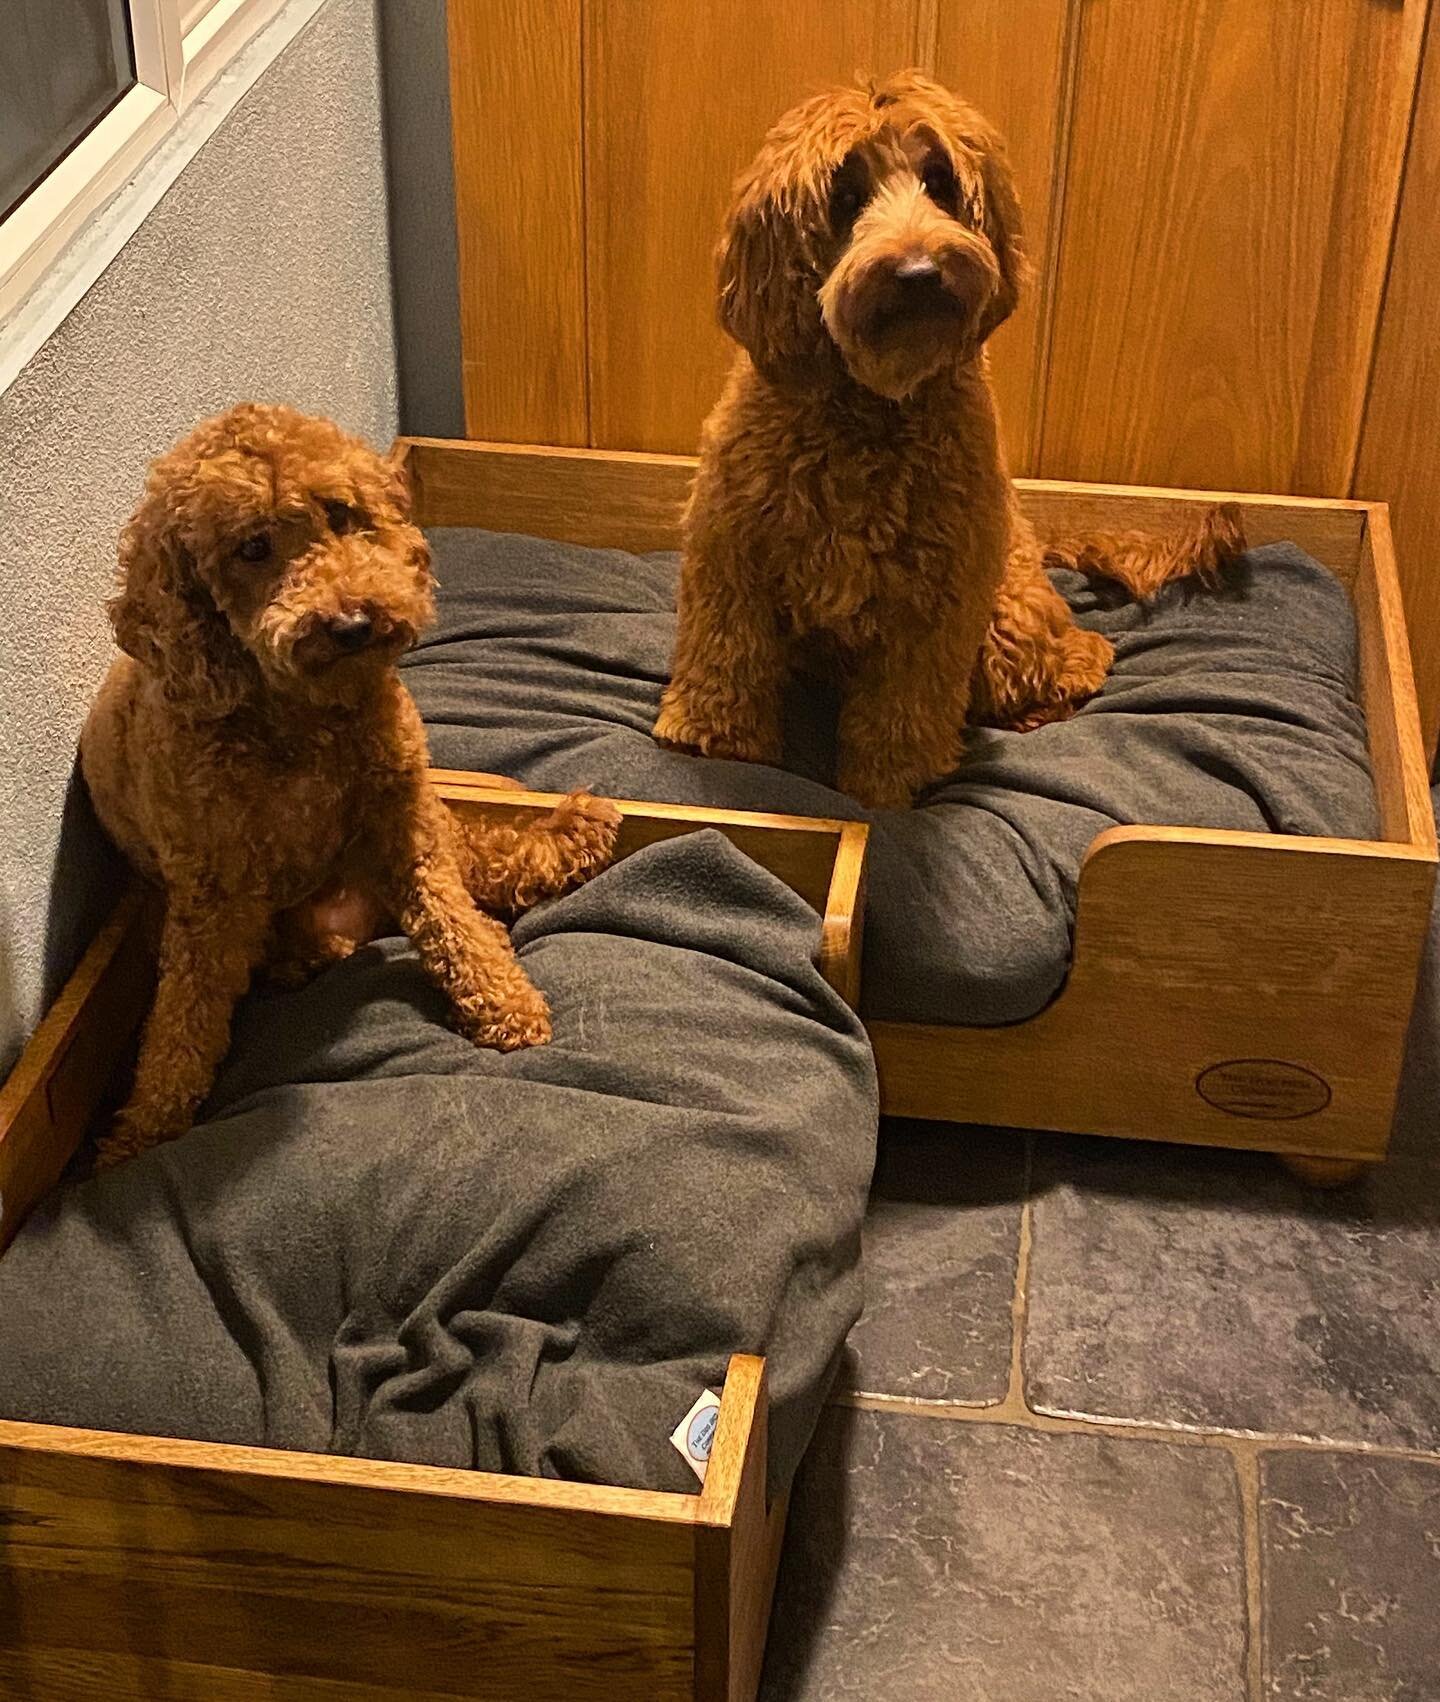 Little Ted has now got his own bed to match his sister&rsquo;s. How cute are they both?  #woodendogbed #oakdogbed #luxurydogbed #cutedogs #happydogs #cockapoo #australianlabradoodle